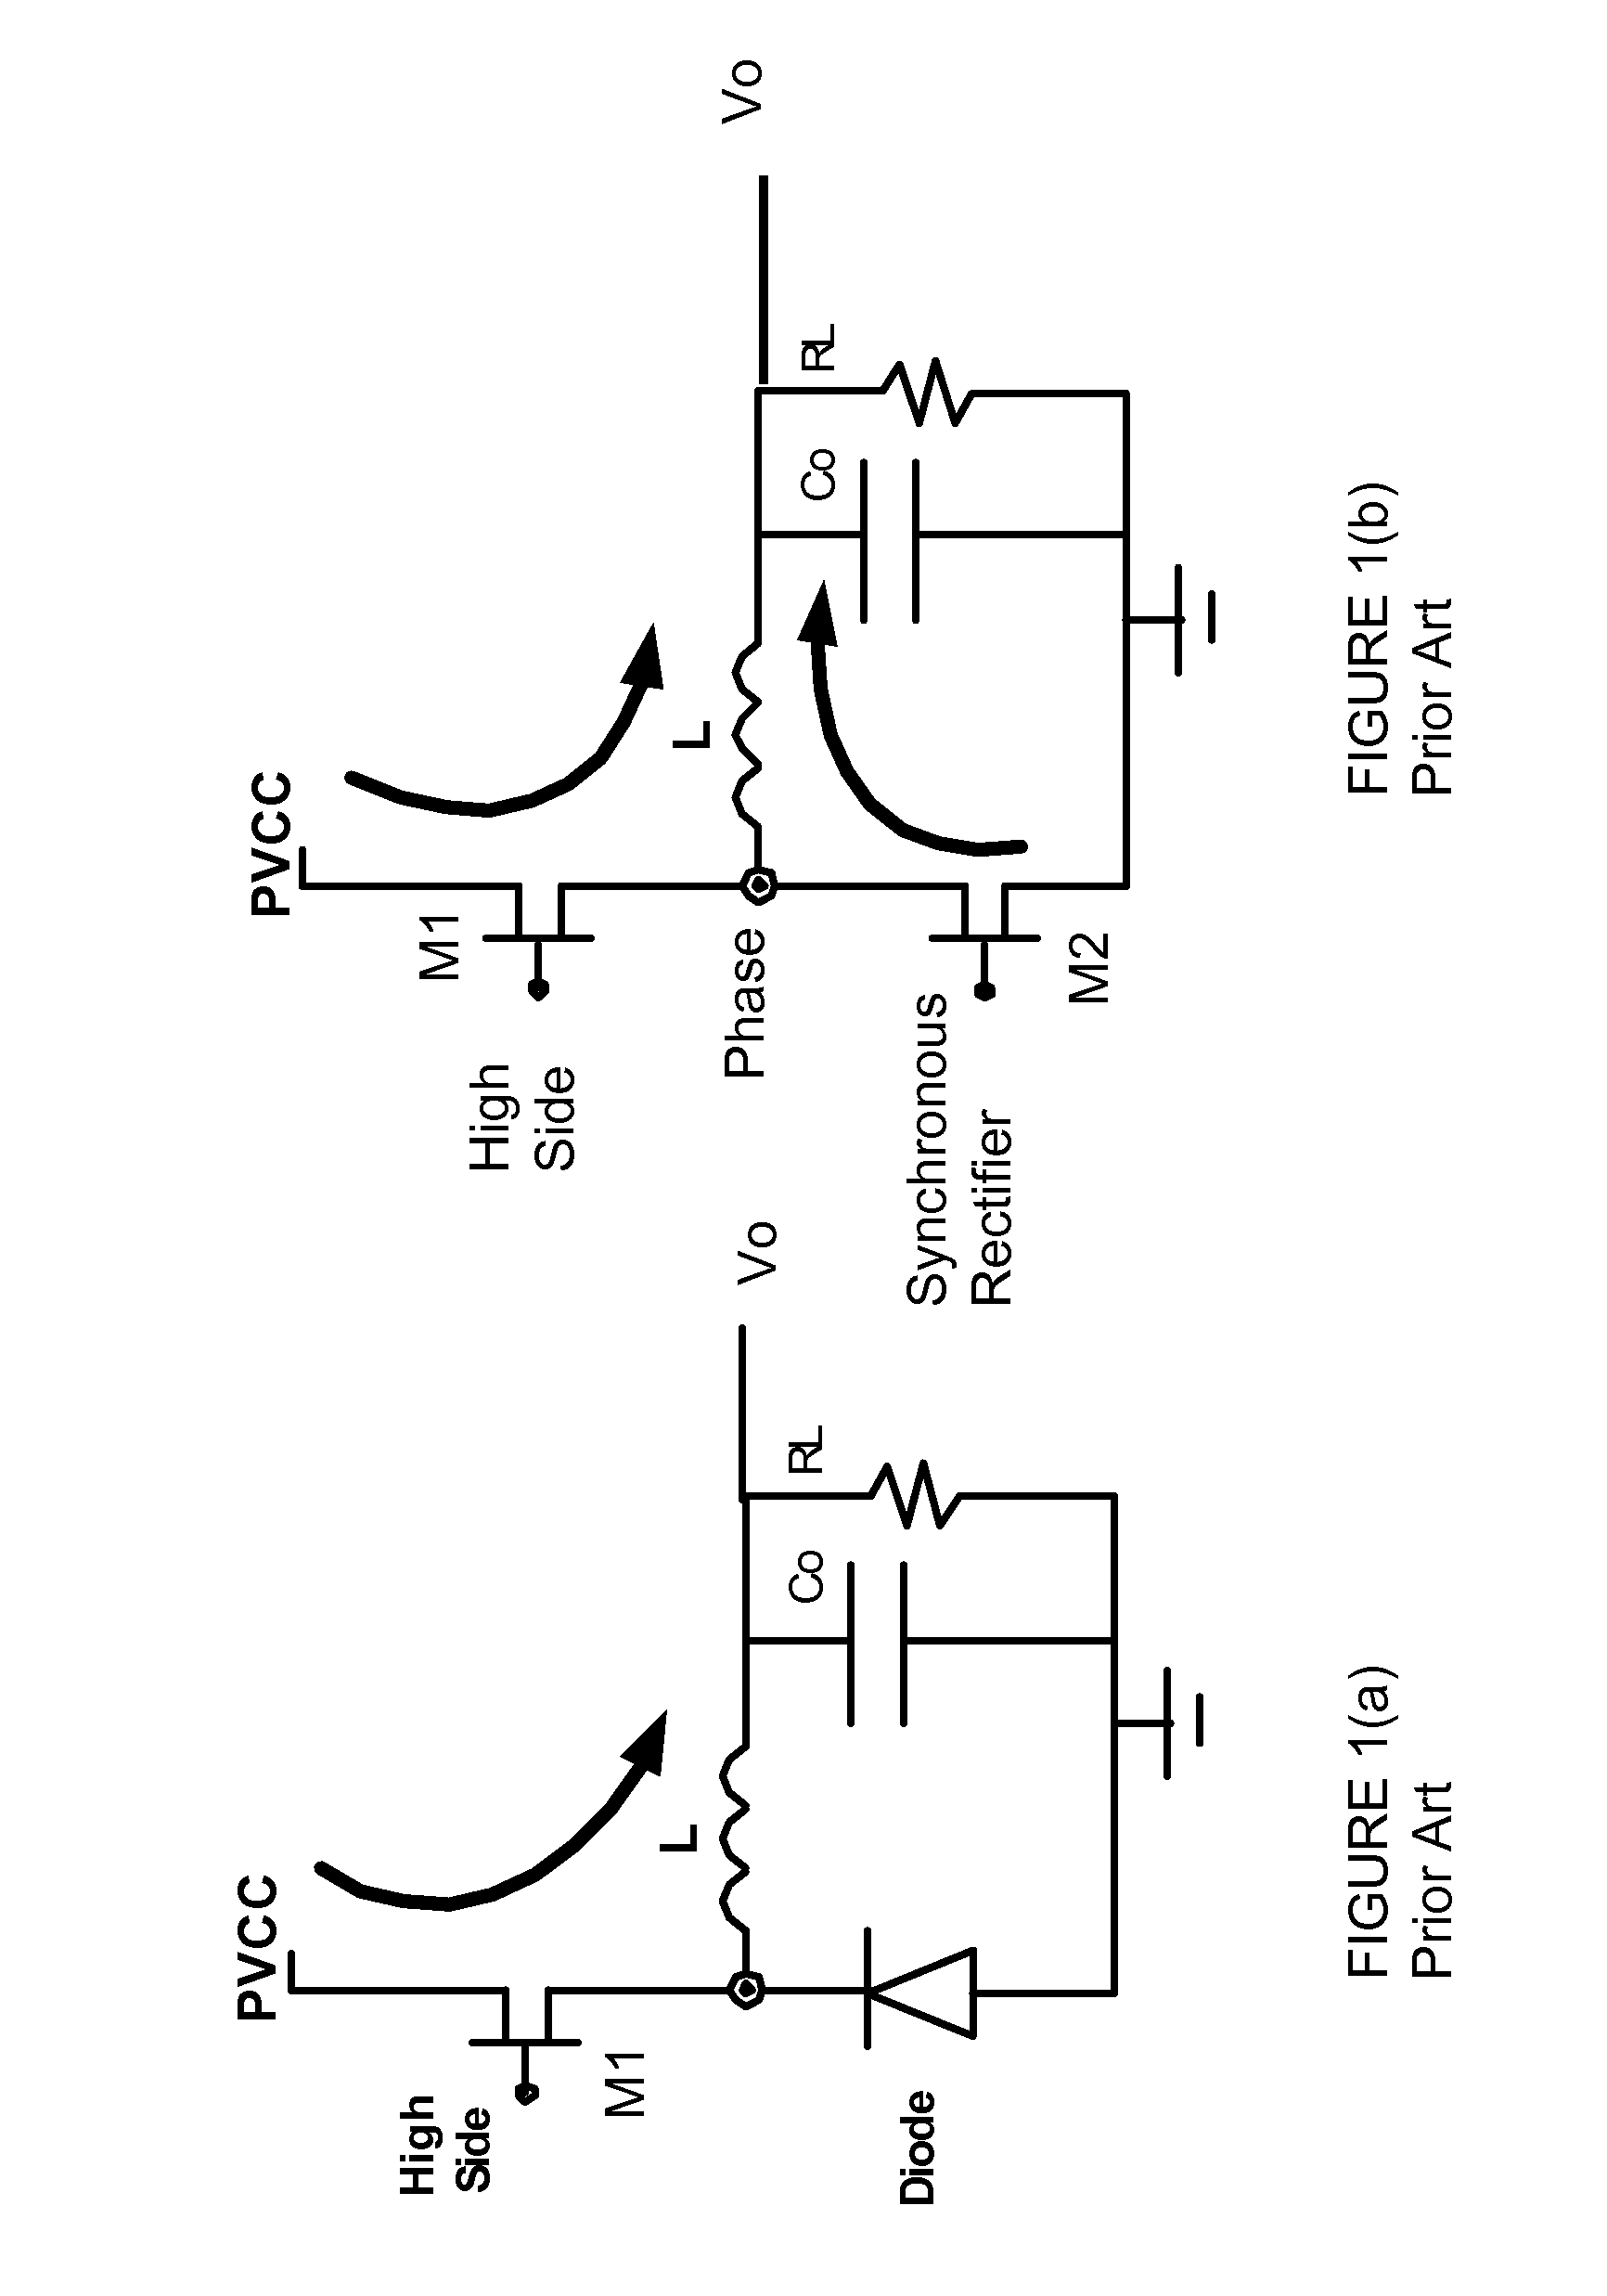 Discontinuous Conduction Mode Control Circuit and Method for Synchronous Converter